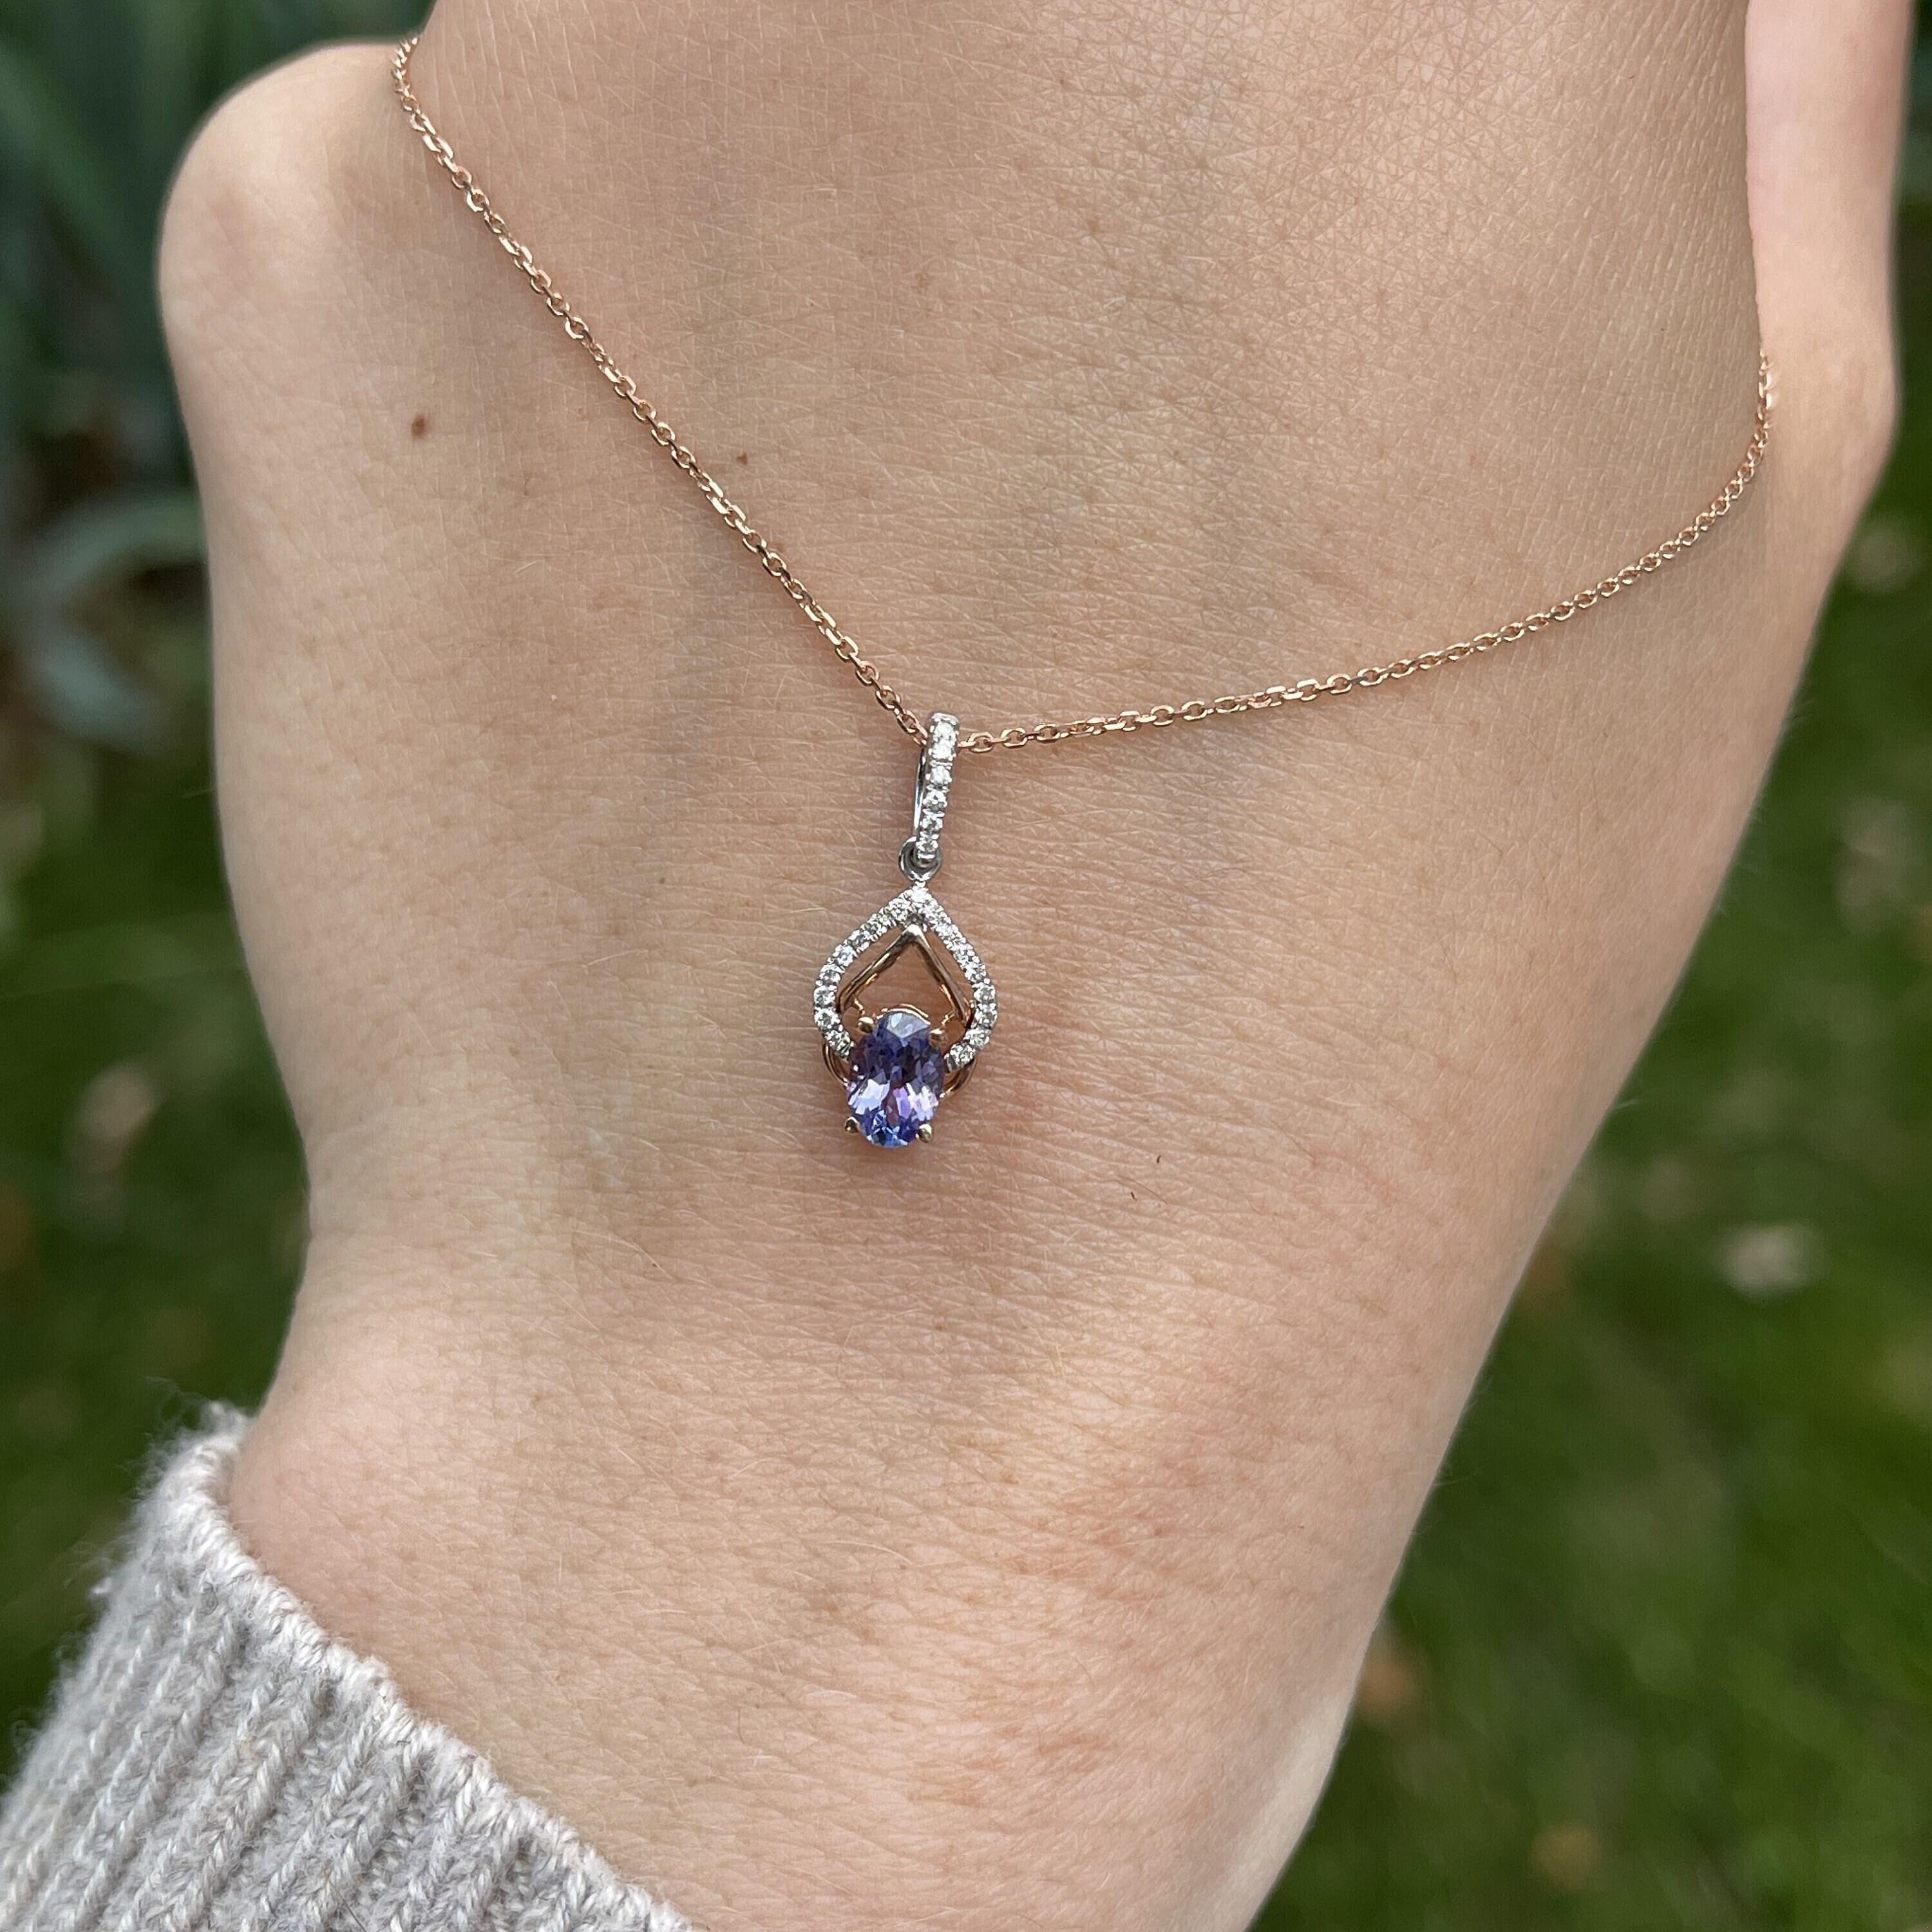 This gorgeous oval tanzanite has beautiful flashes of red and purple accentuated in this solid gold dual-tone setting. The earth mined natural diamonds add an extra sparkle on this petite but intricate pendant. A beautiful something blue, or